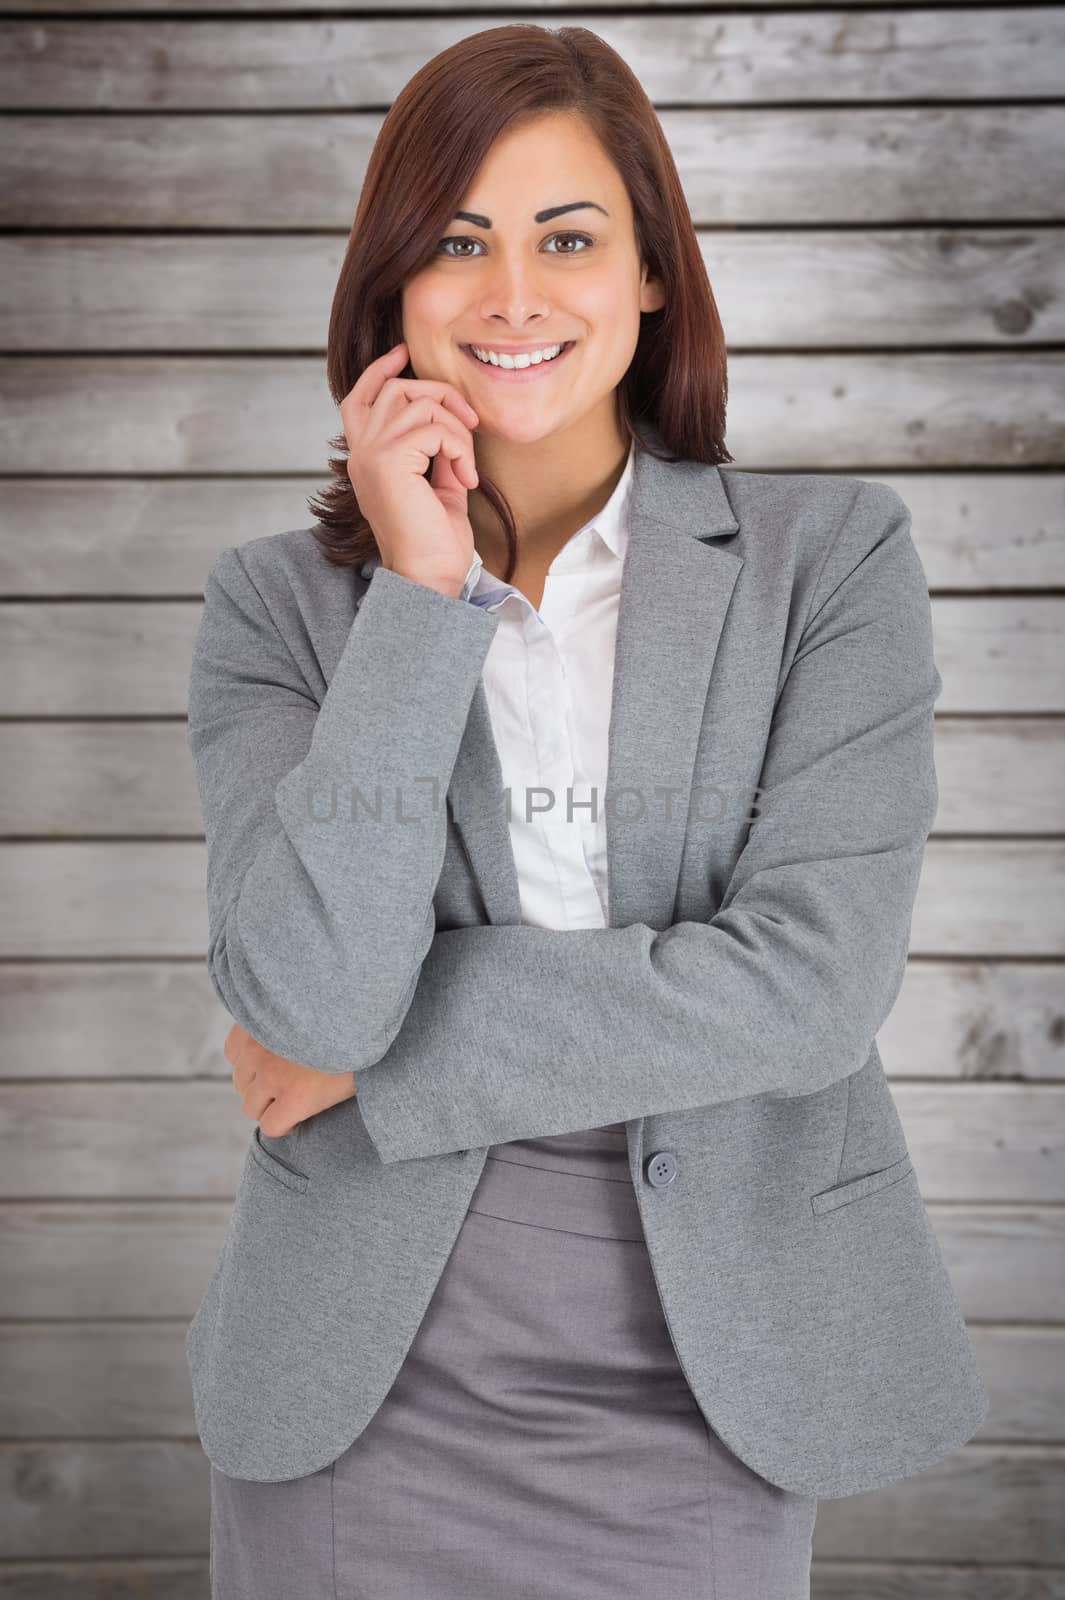 Smiling thoughtful businesswoman against wooden planks